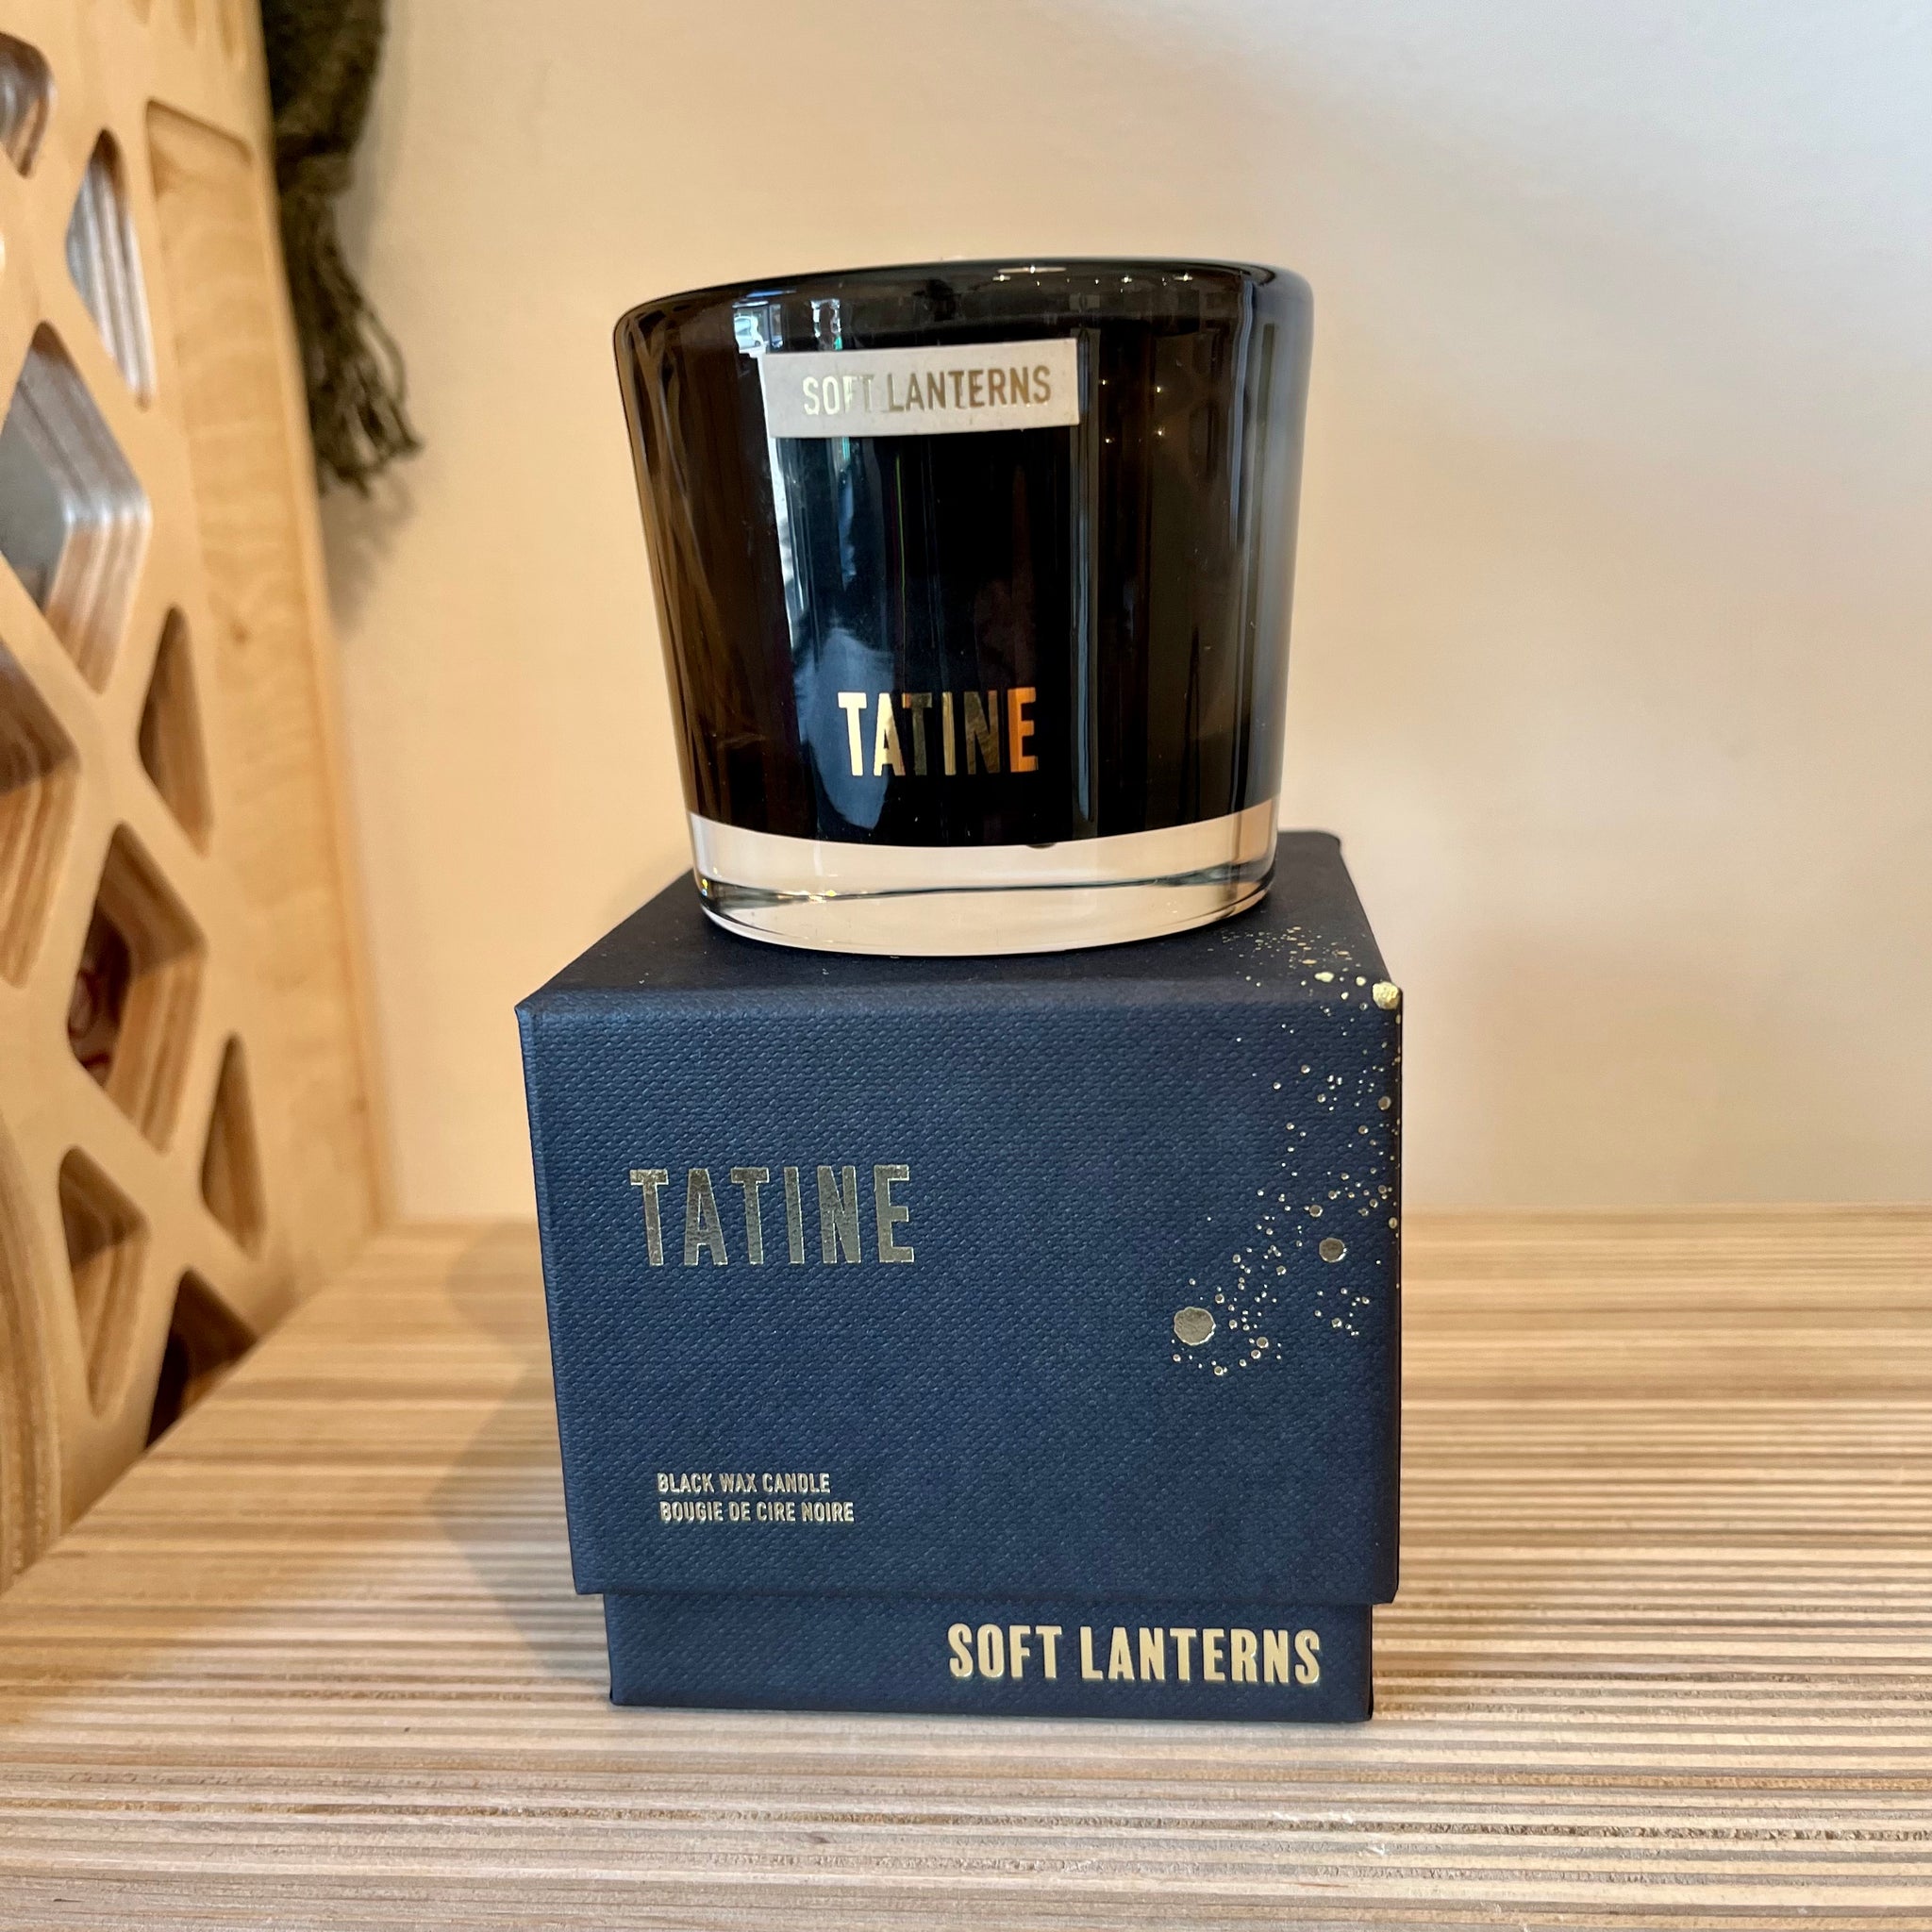 Soft Lanterns Hand-Poured 3 oz. candle by Tatine